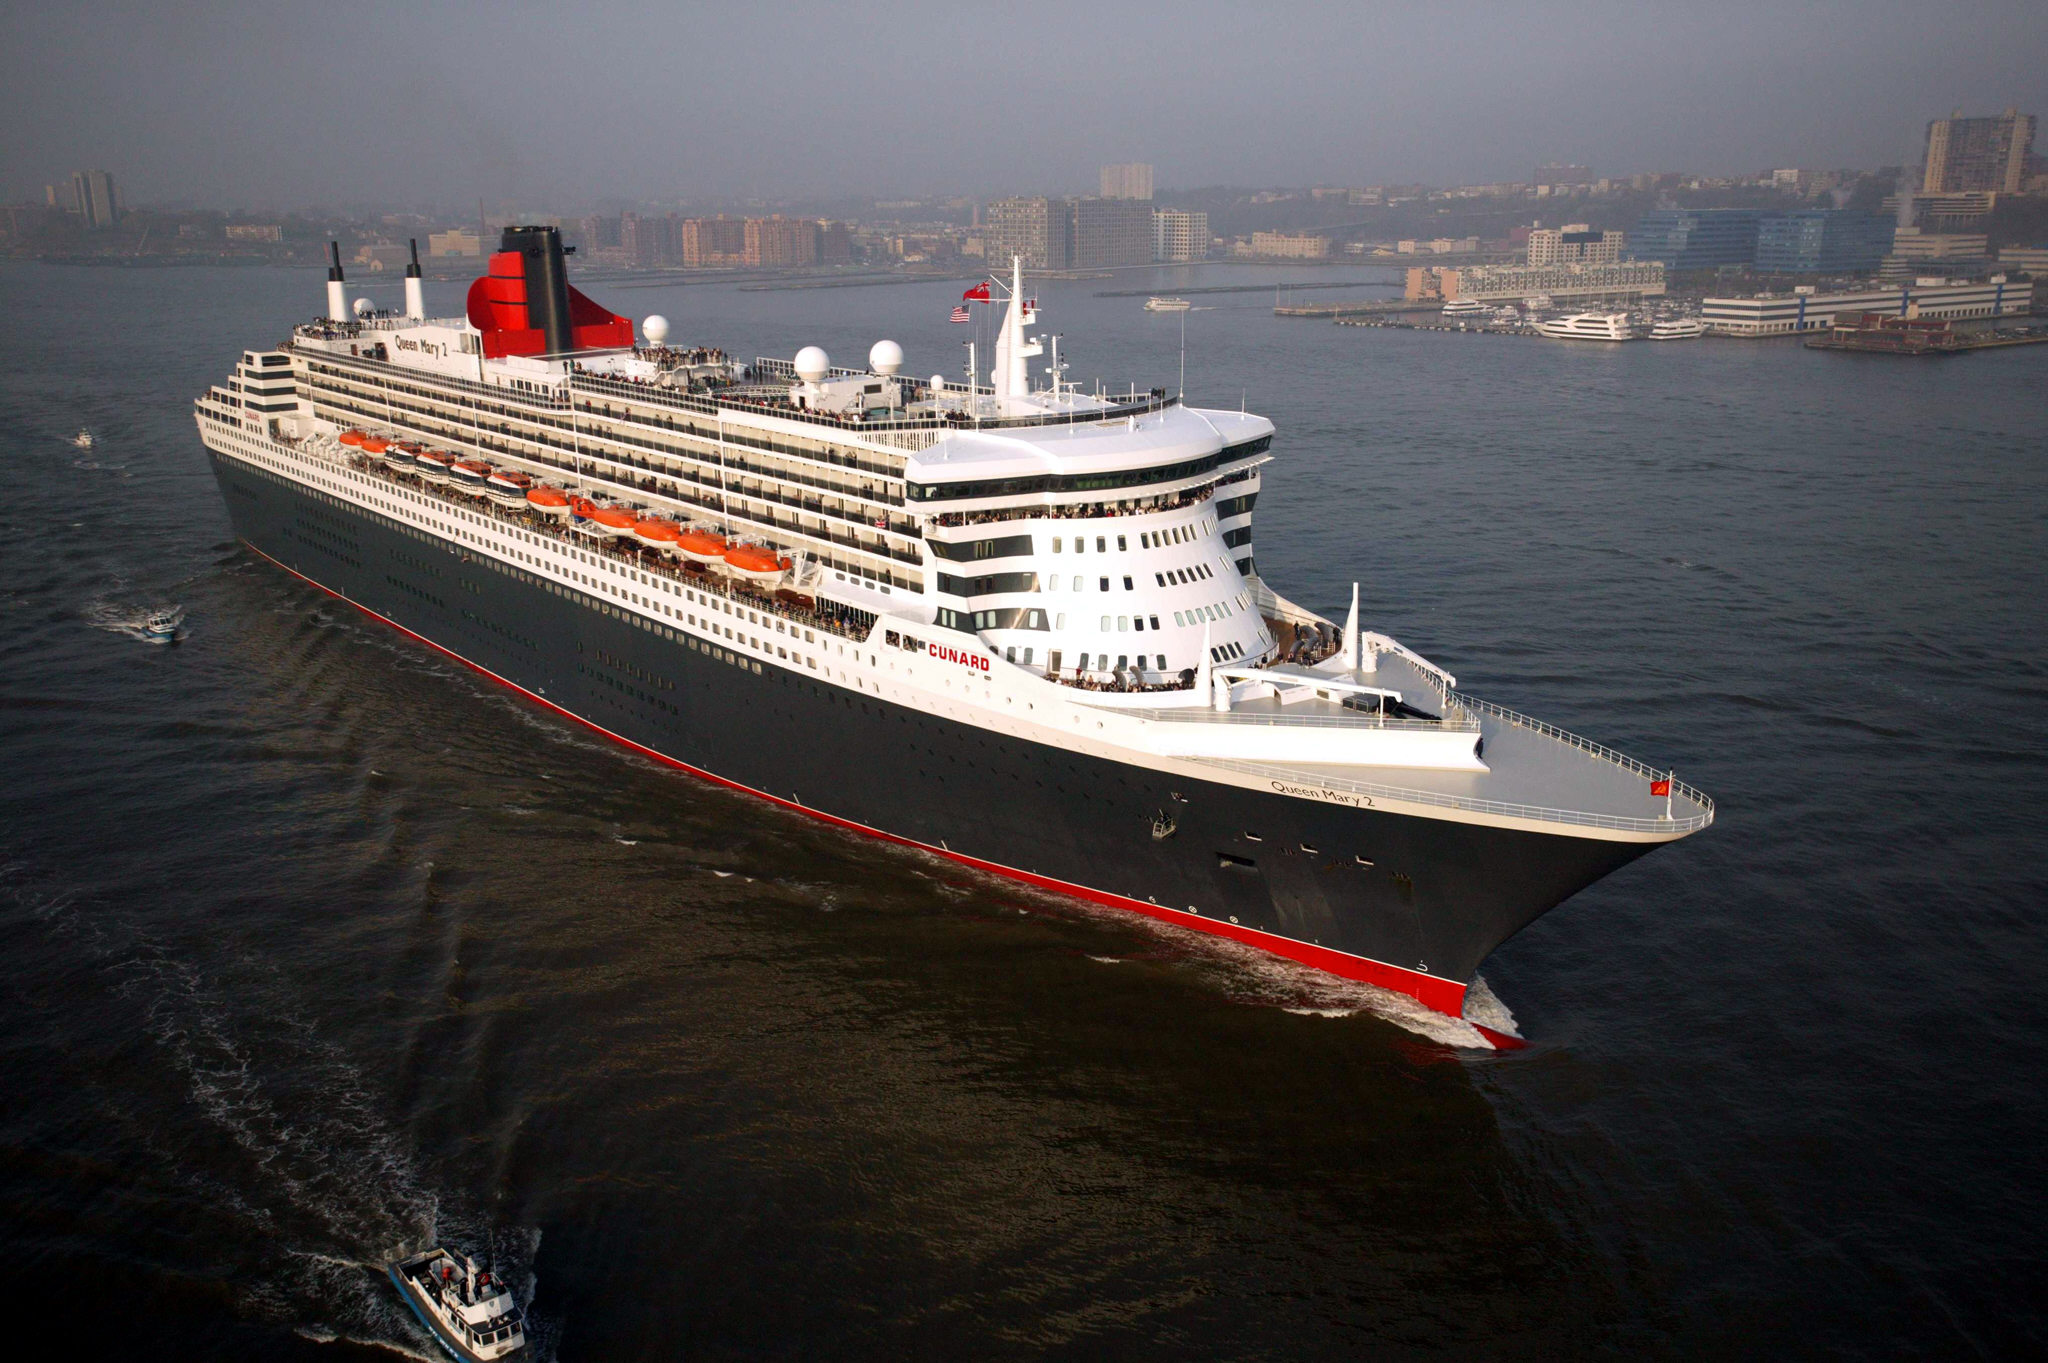 Cruise season begins in Oman, 150 cruise liners expected